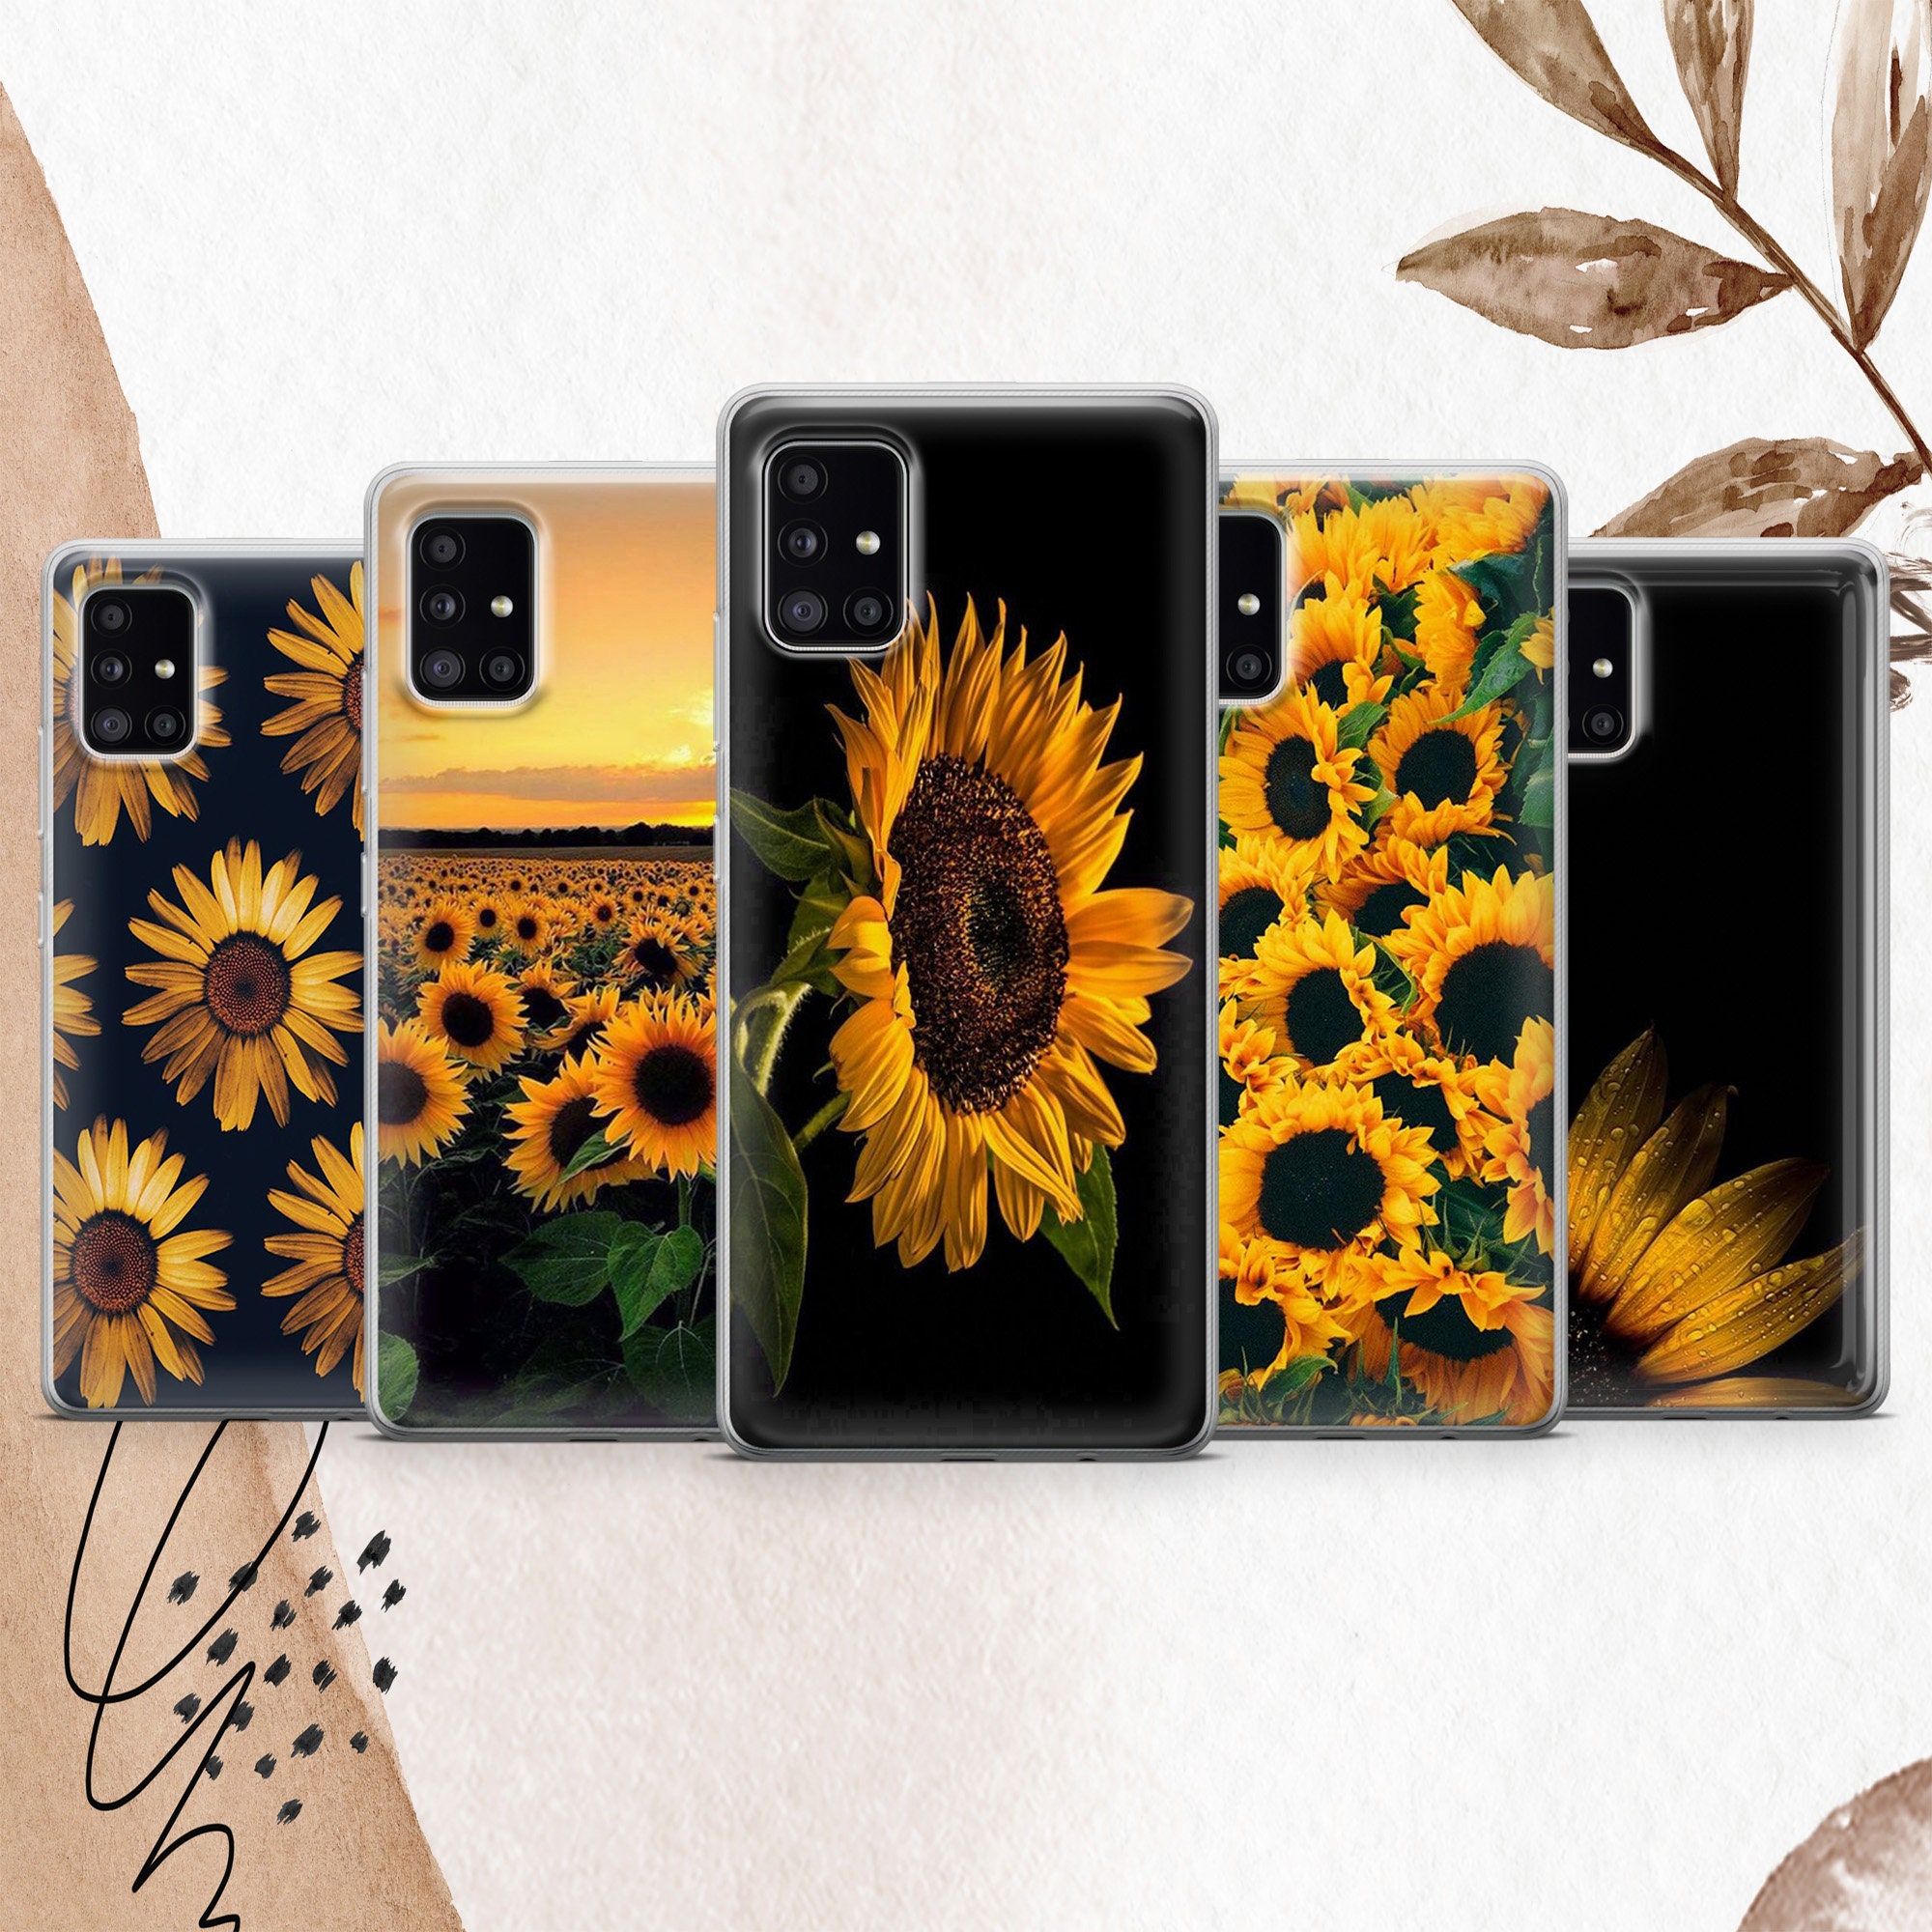 Luxurious square quadrangle flower For Samsung Galaxy S 8 9 10 21 22 Ultra  Case Note 10 20 Plus A 51 71 72 32 52 4G And 5G Cover